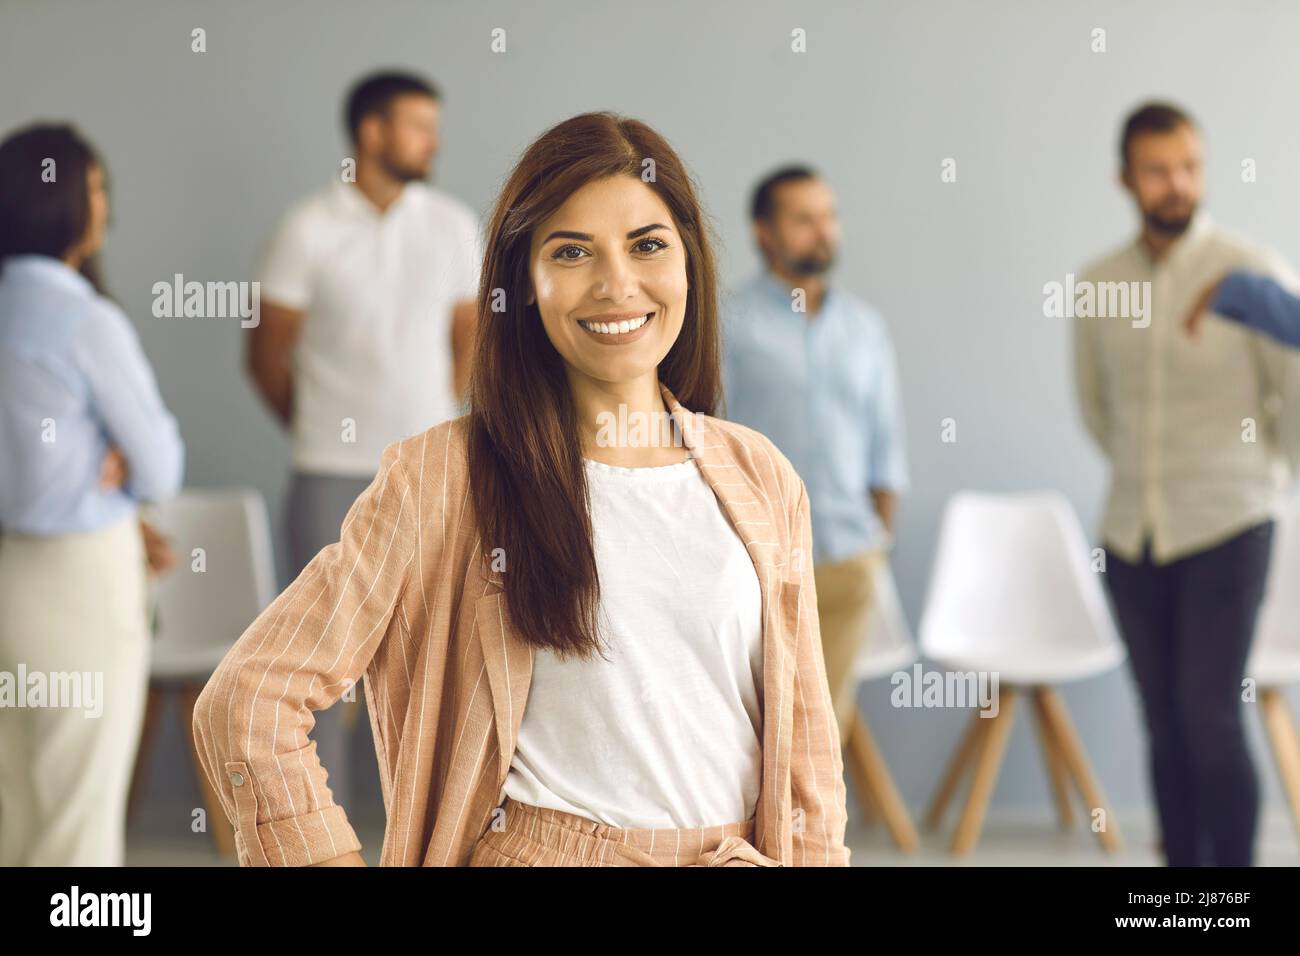 Portrait of happy successful beautiful businesswoman or professional business coach Stock Photo